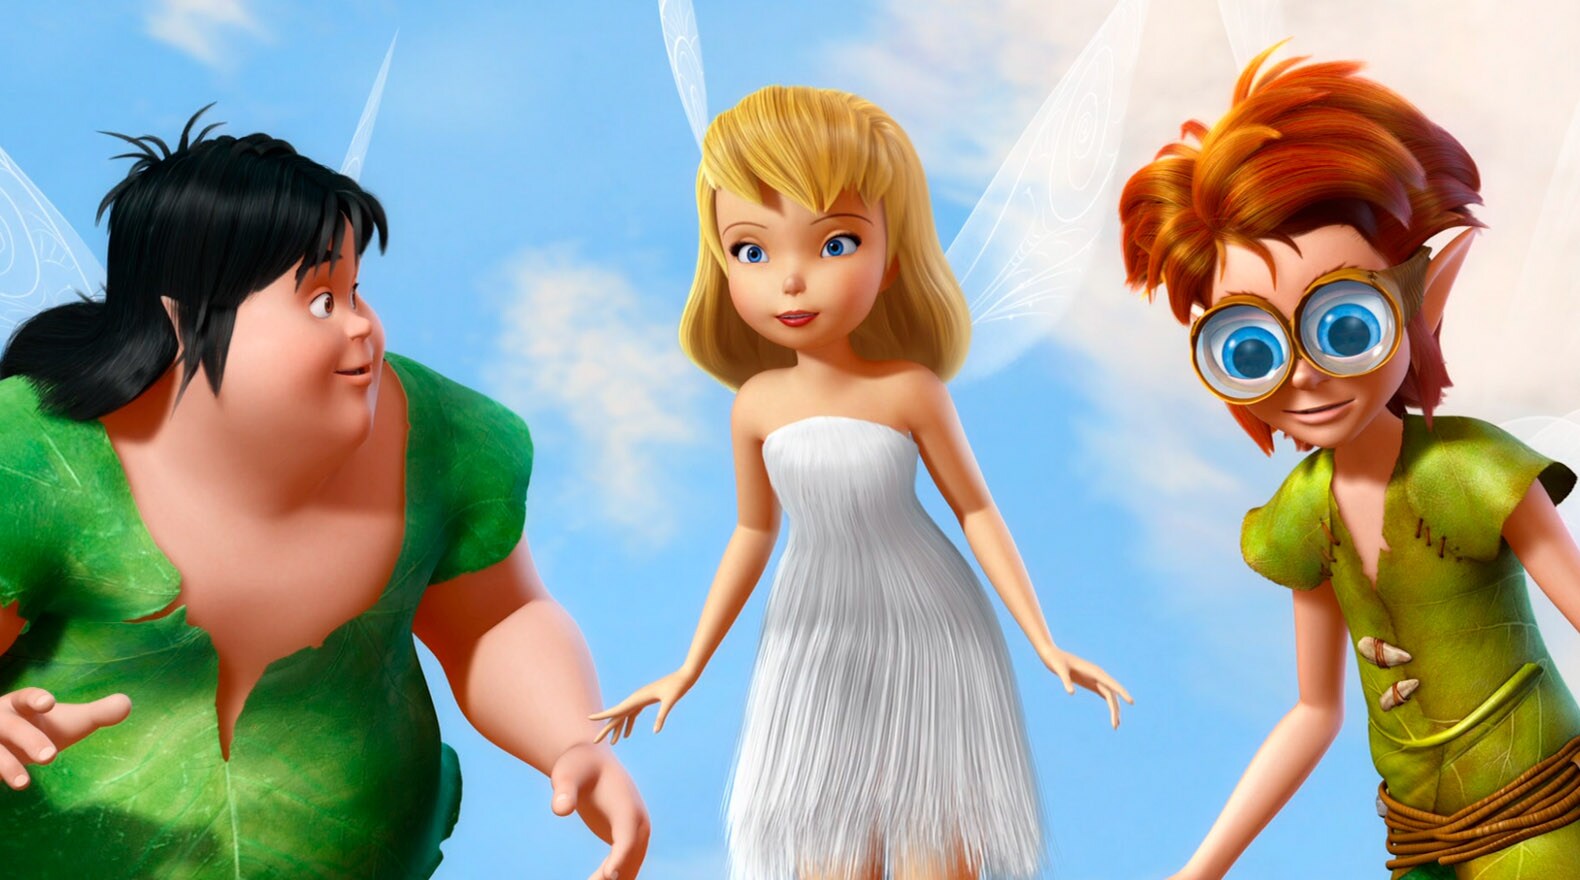 Clank tinker bell